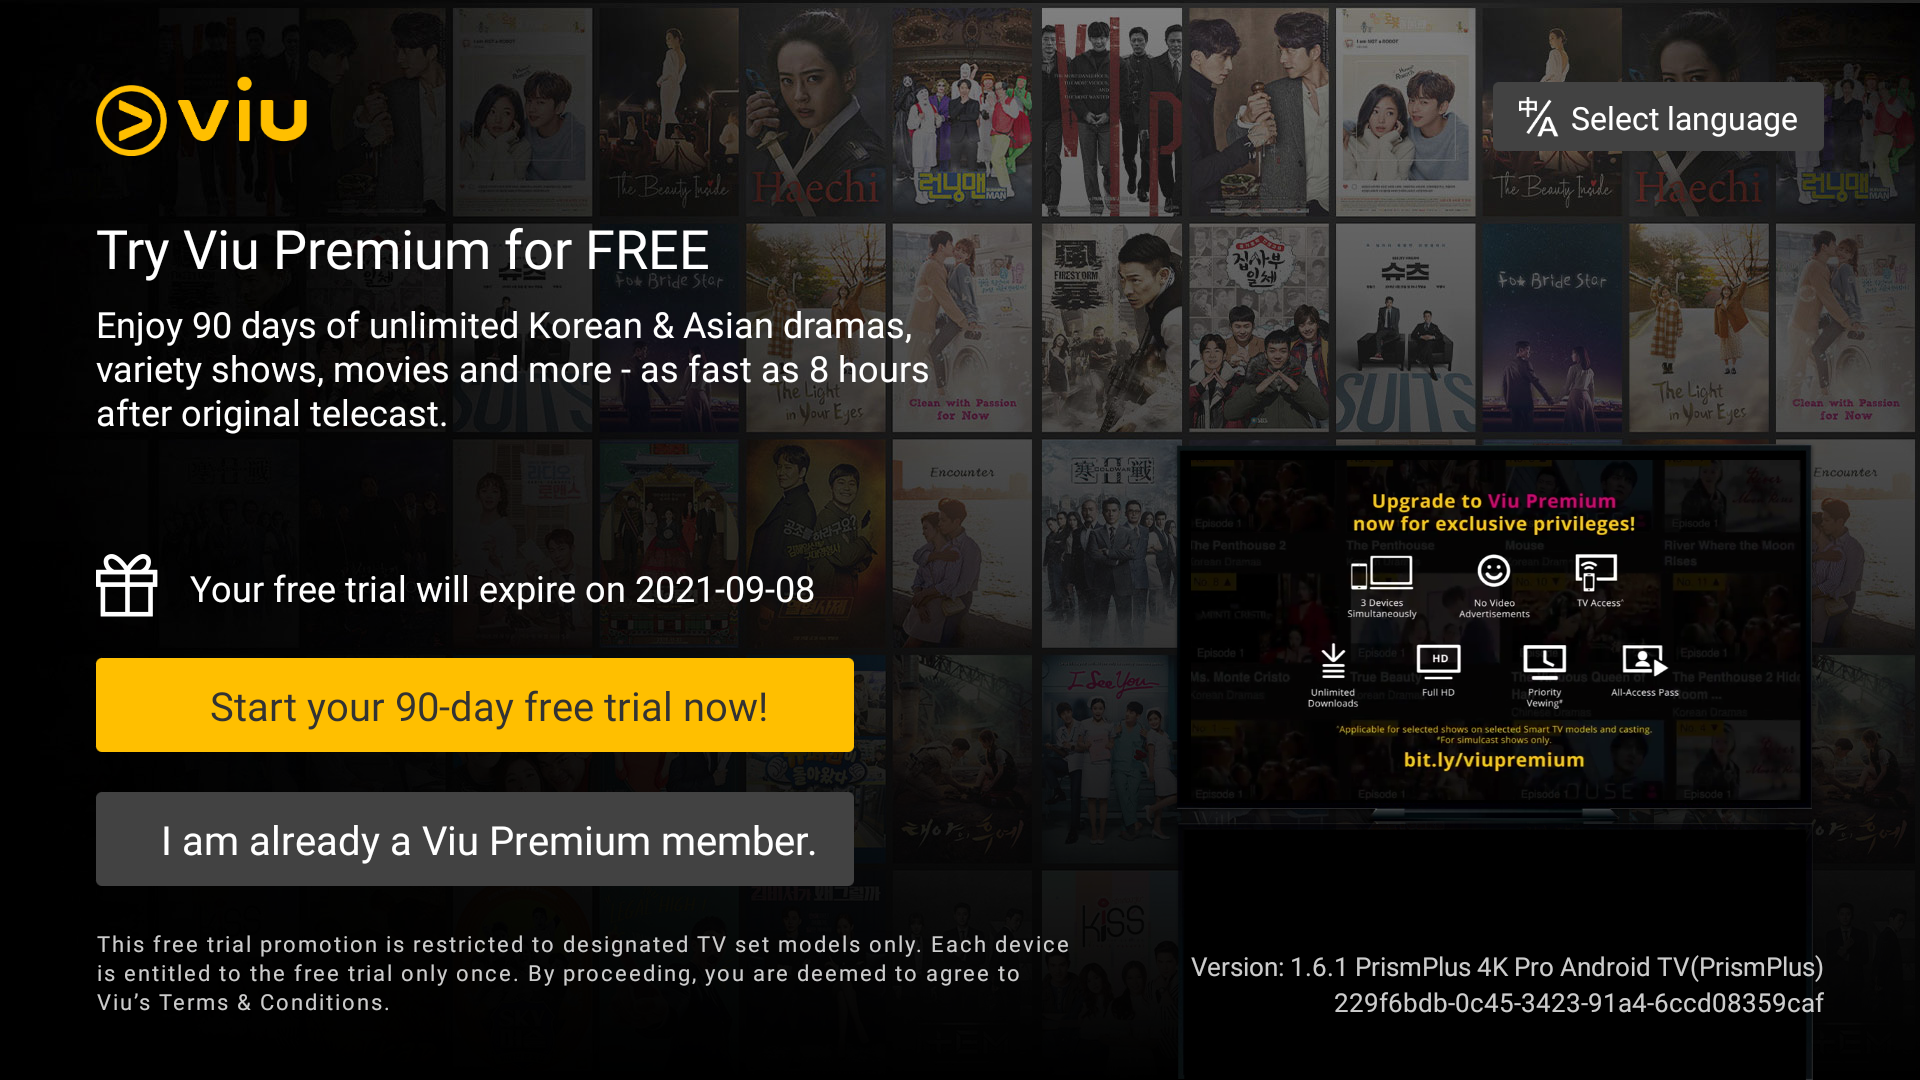 1. Launch the Viu TV app after it has been installed on the TV and click on the Start your 90-day free trial now!